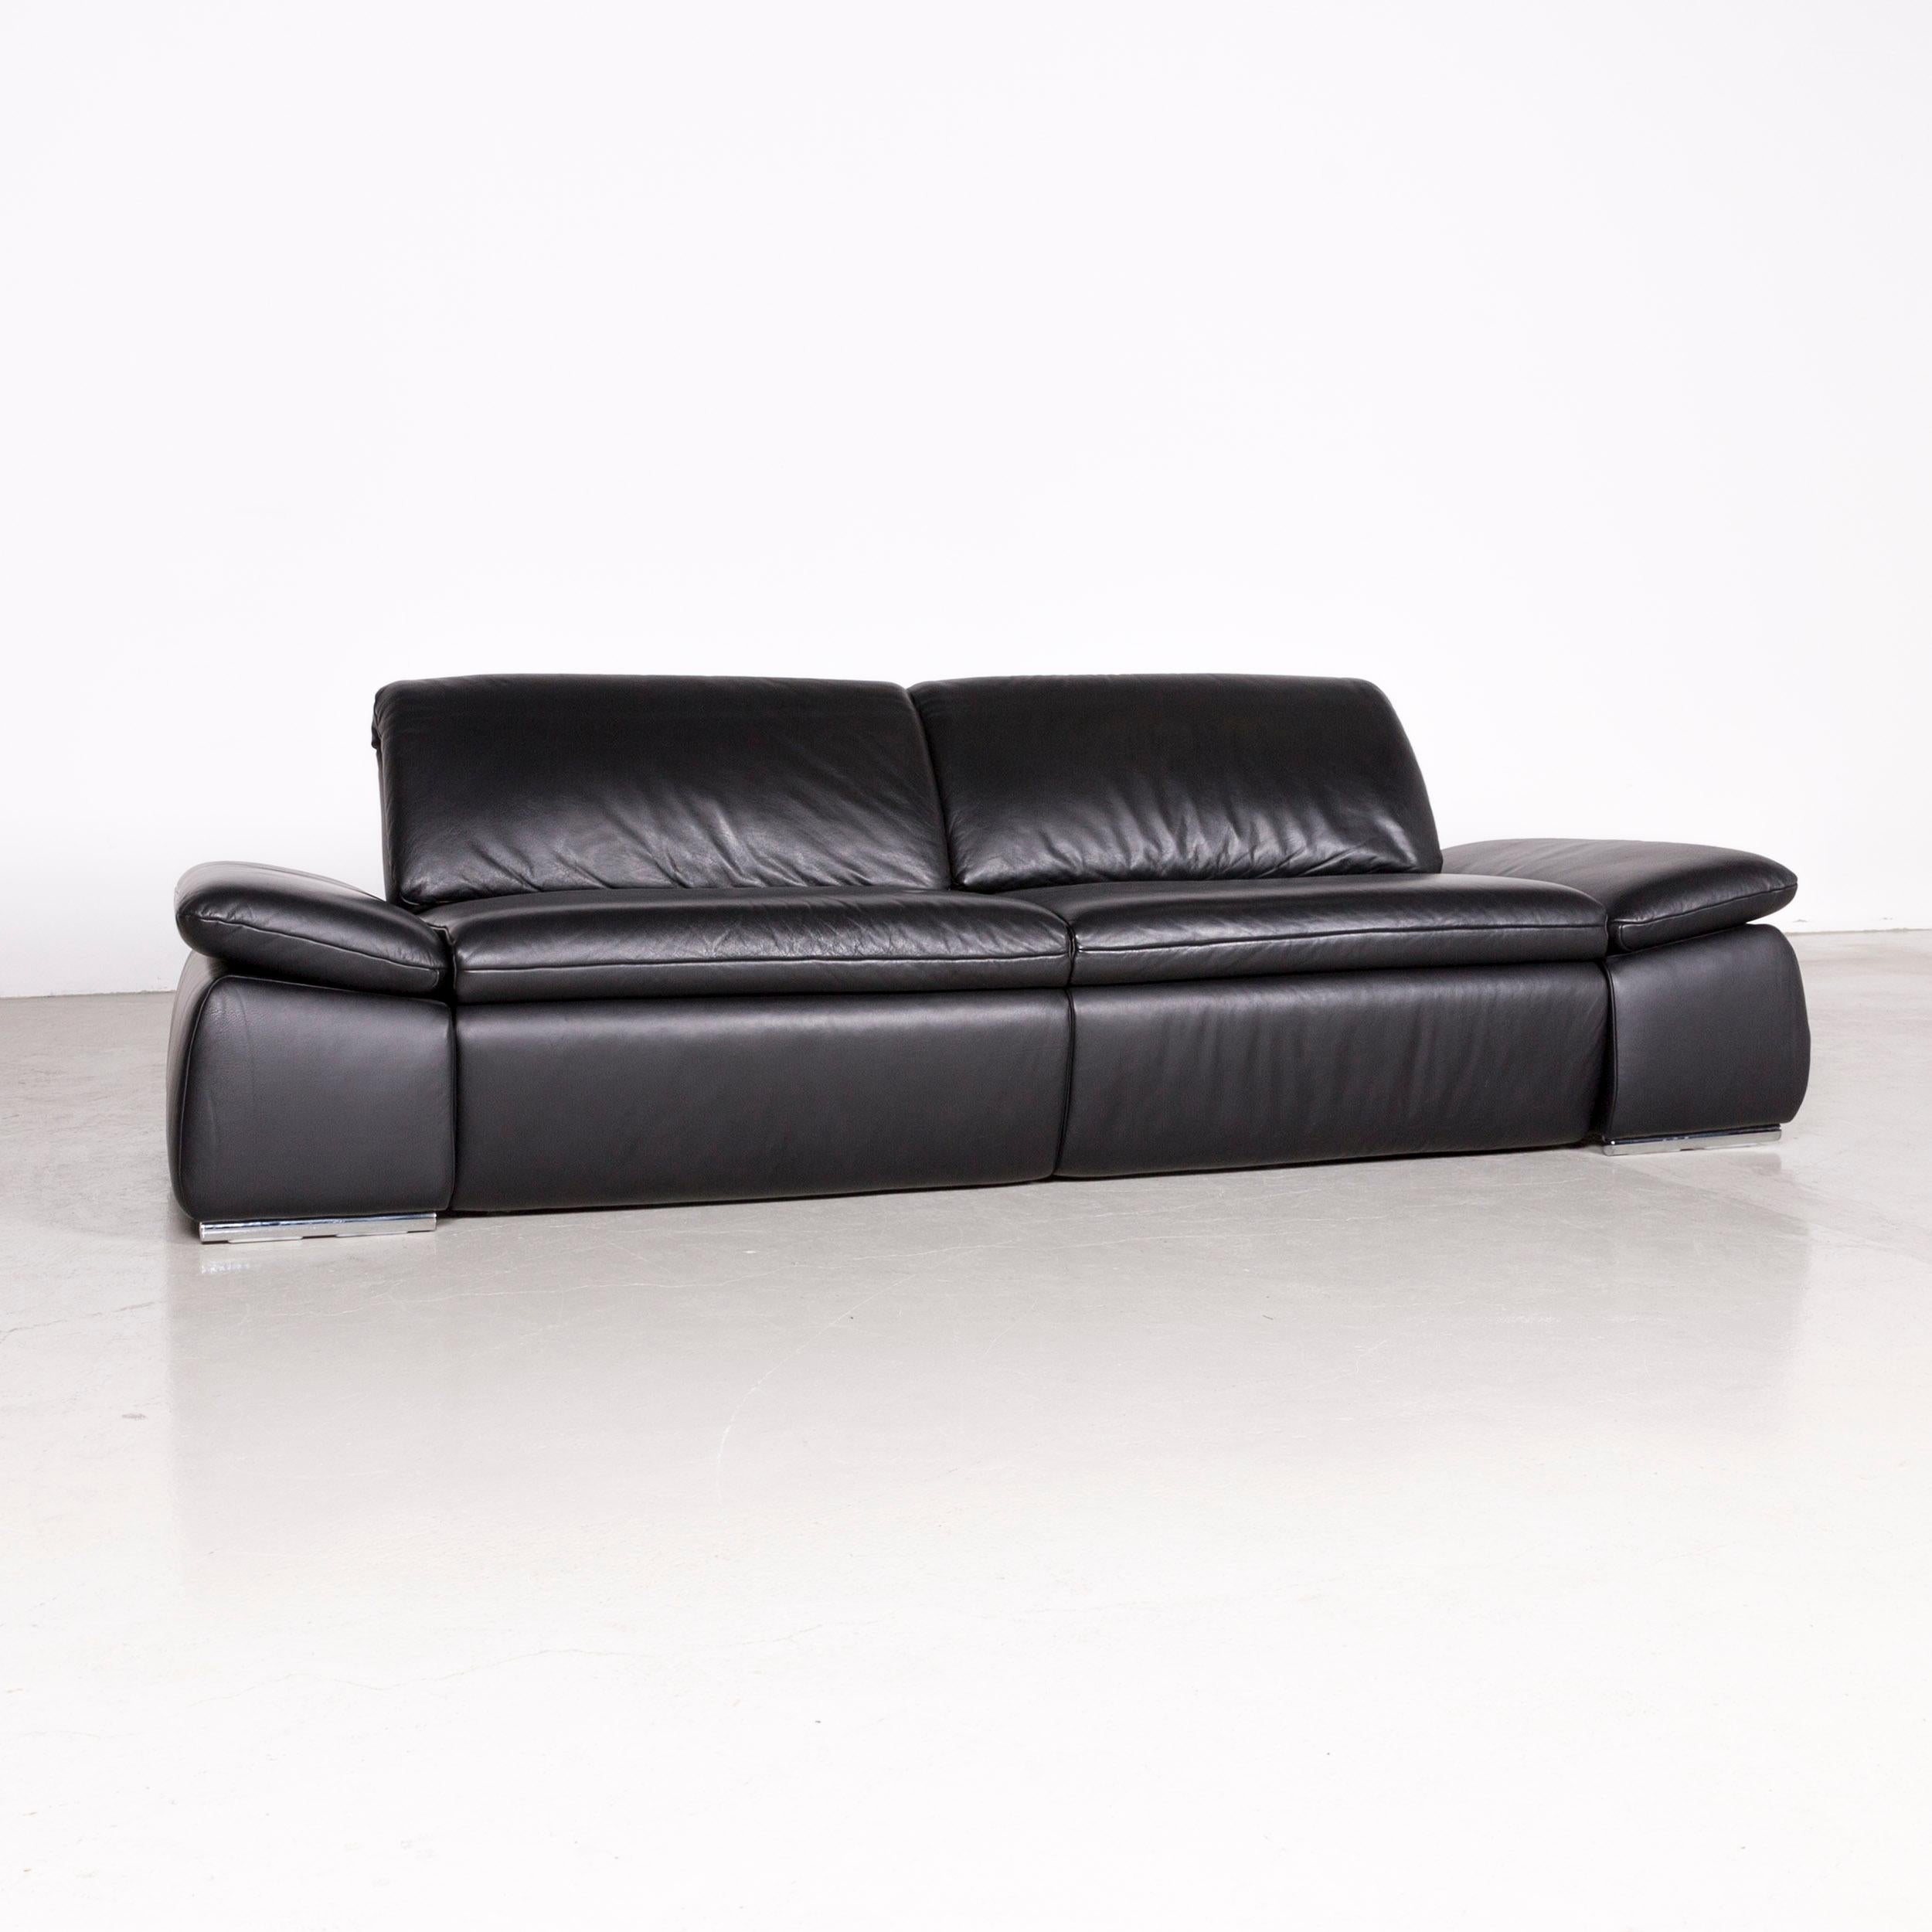 Koinor Evento designer sofa brown three-seat leather couch function seatheating.